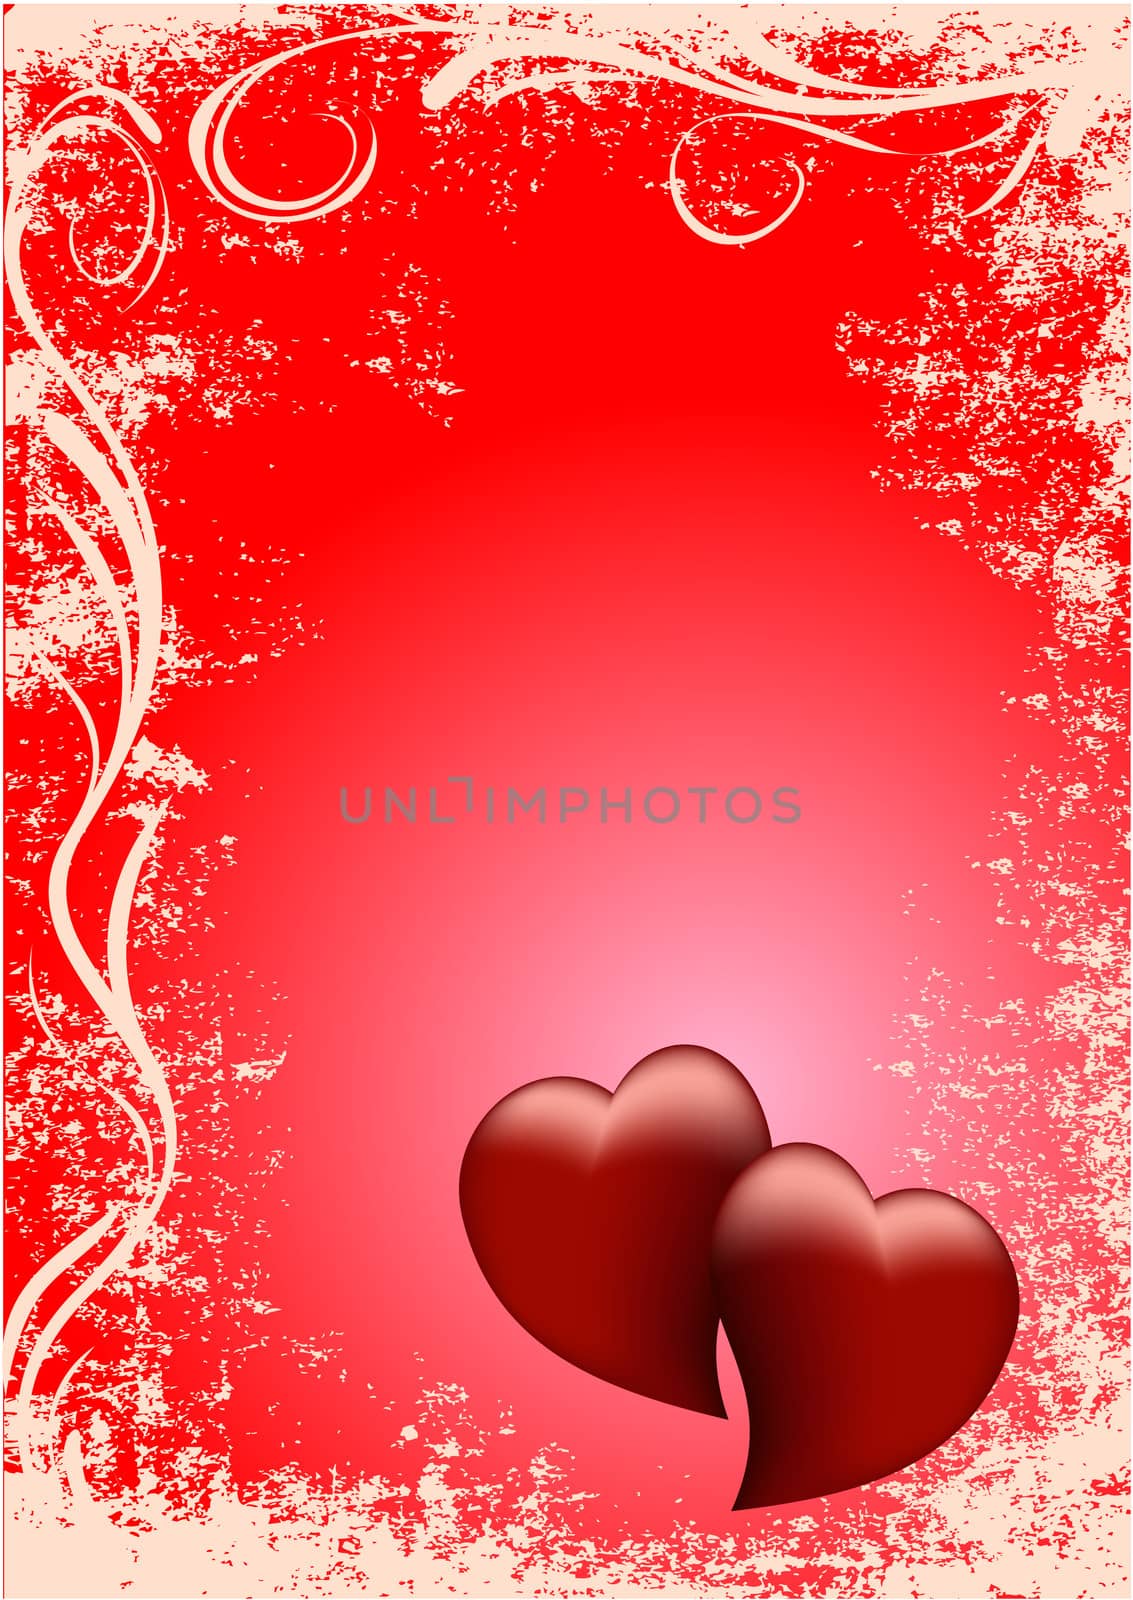 red card in grunge style with two red hearts and vintage ornament